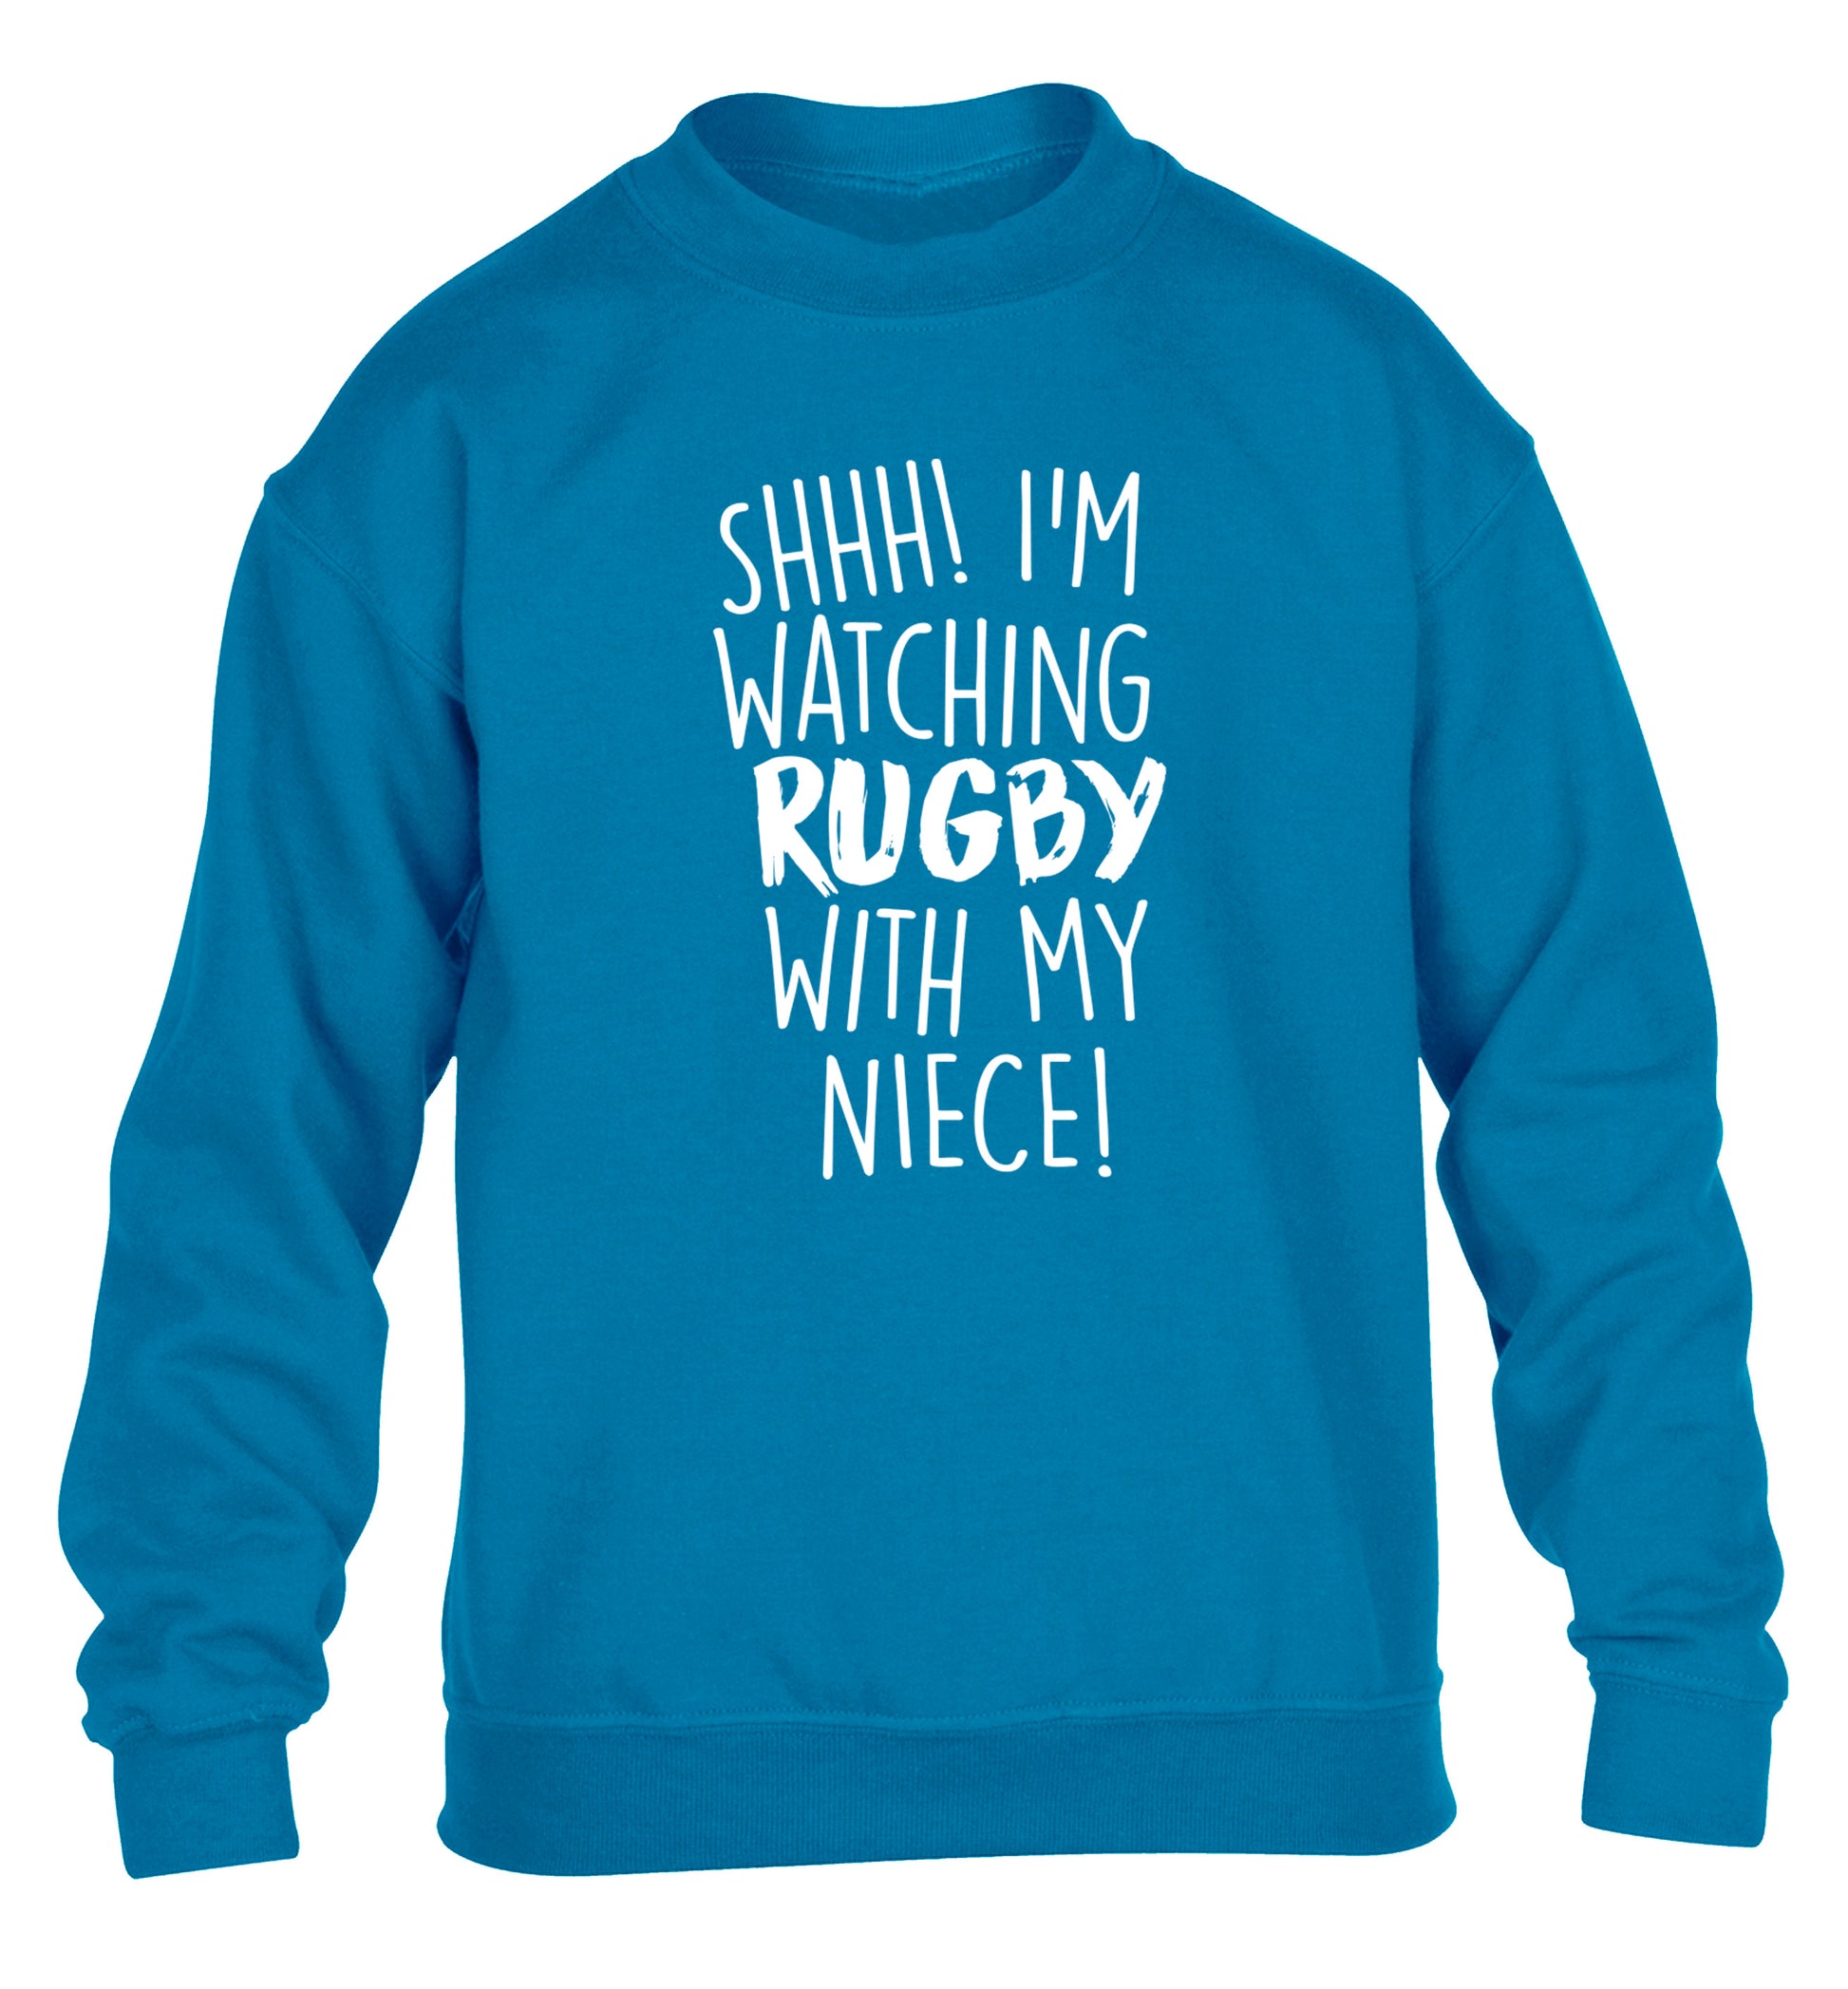 Shh.. I'm watching rugby with my niece children's blue sweater 12-13 Years